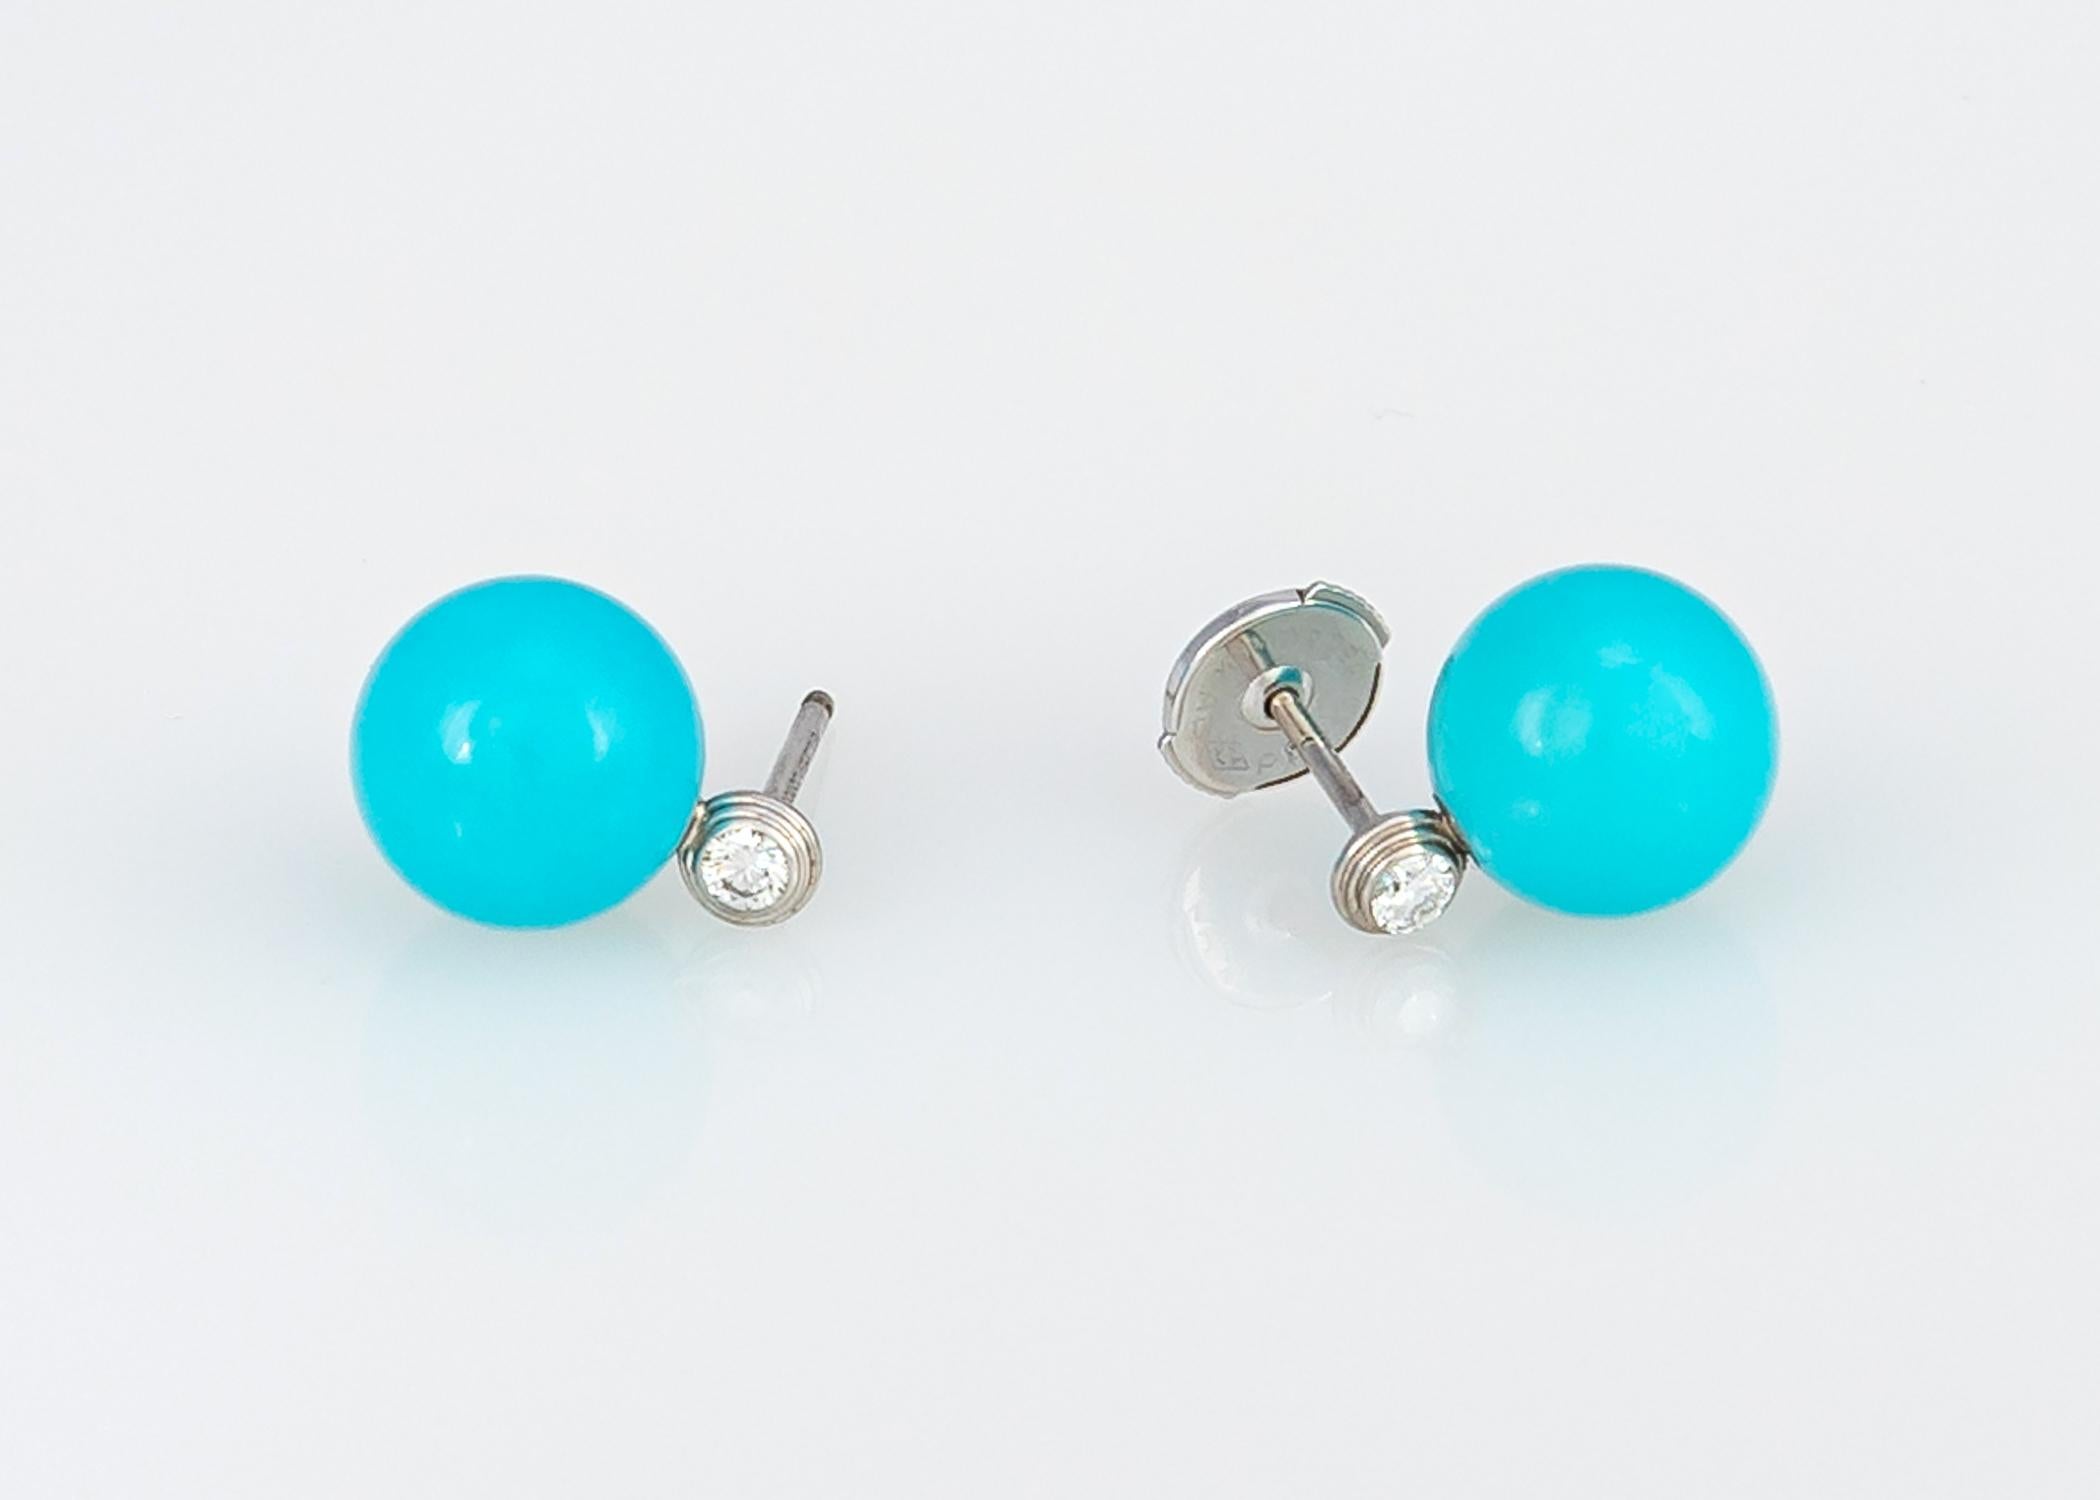 When Cartier does it less is more. If you enjoy wearing diamond or pearl stud earrings you will reach for these often. The turquoise measures 9mm